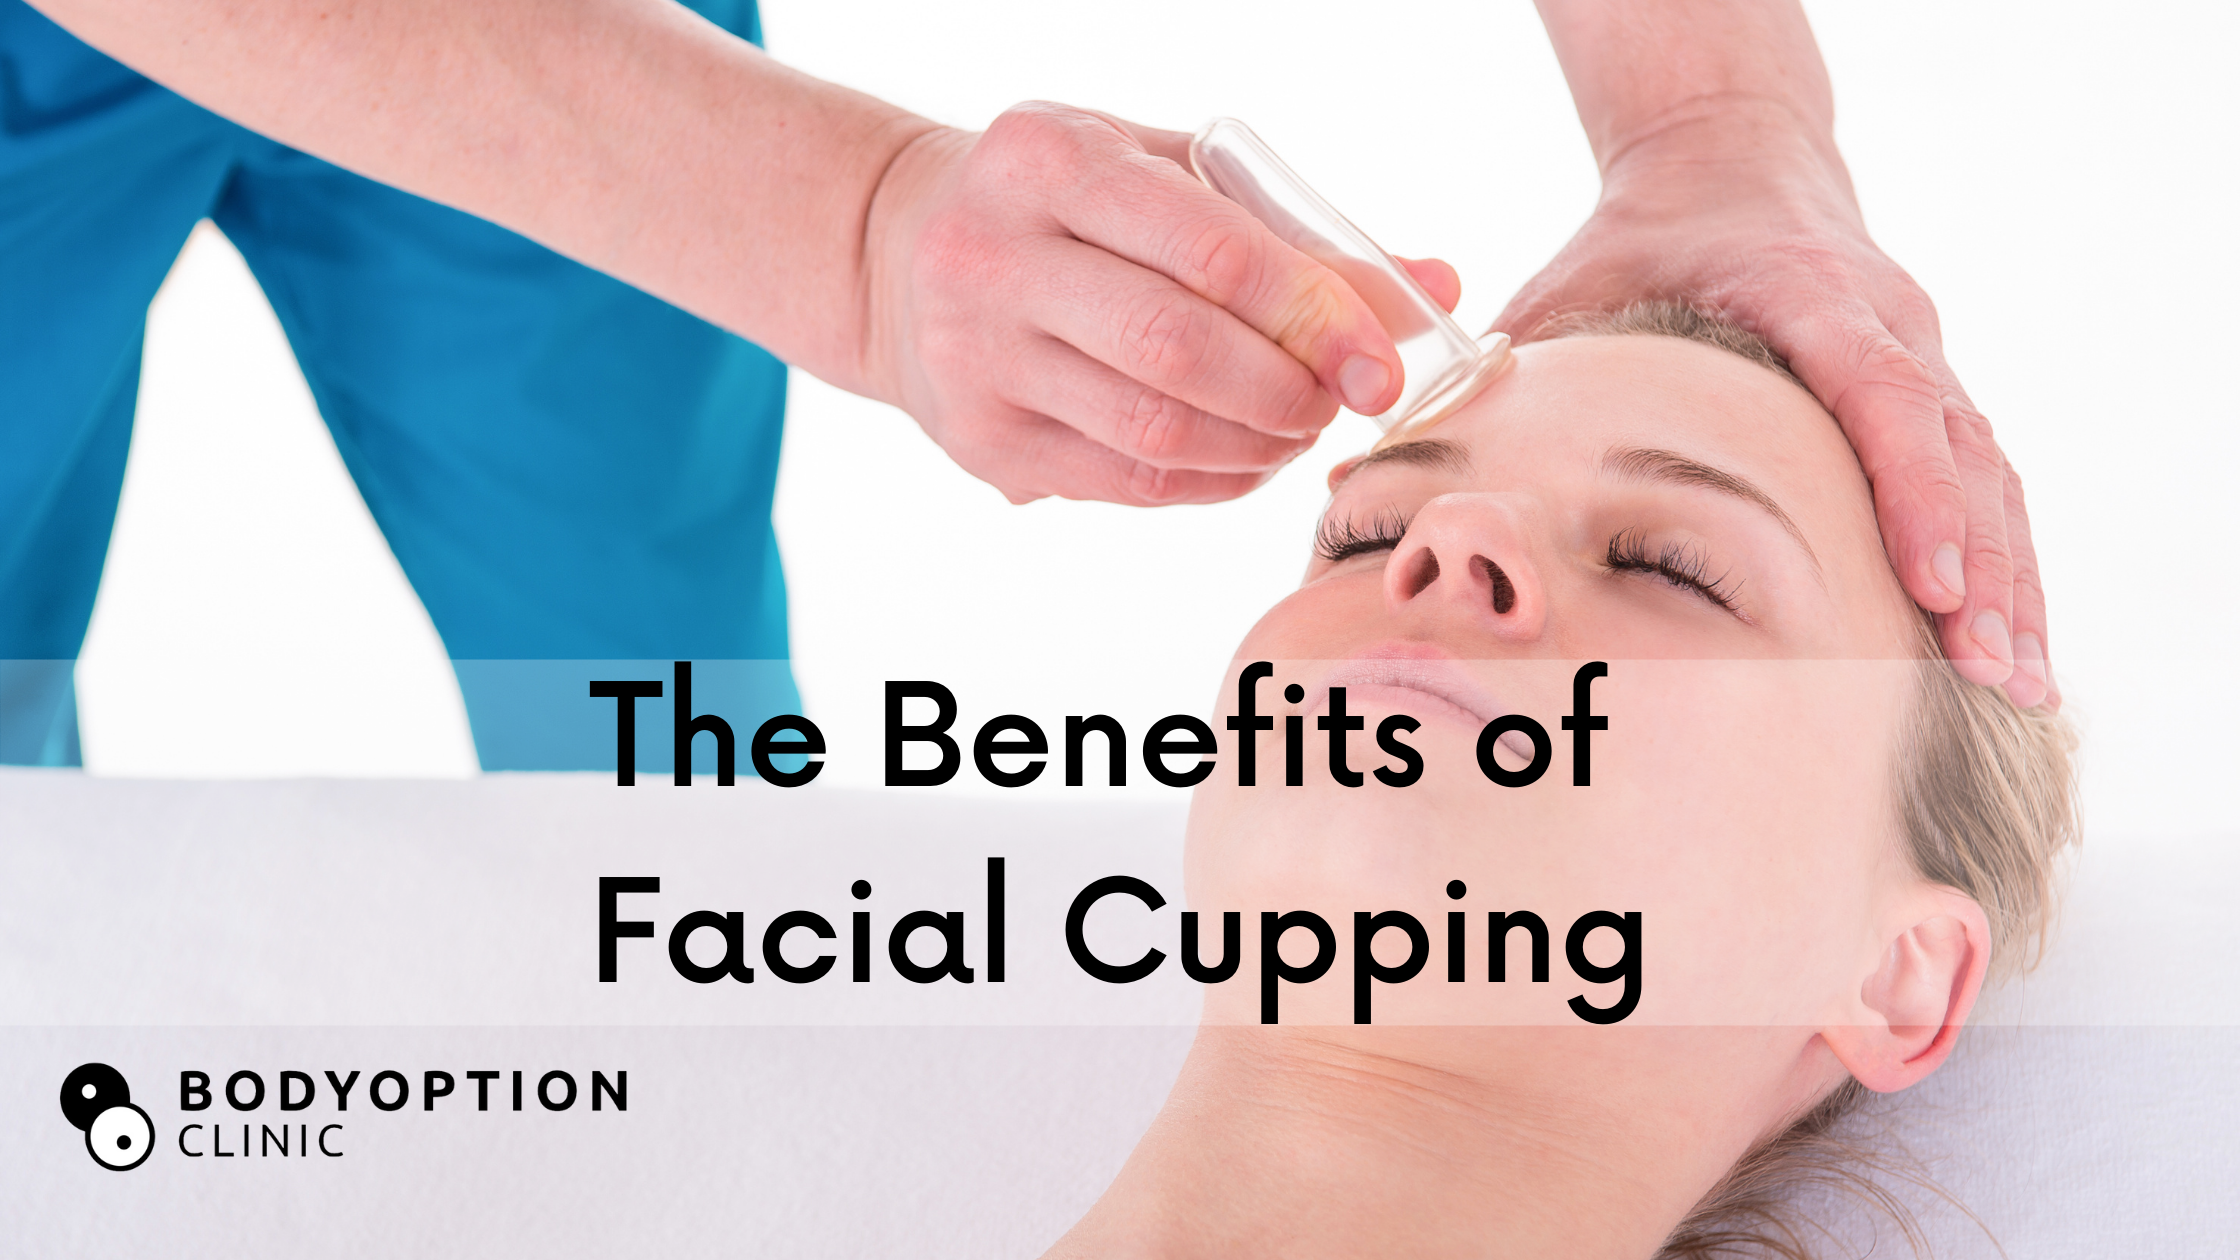 The Benefits of Facial Cupping